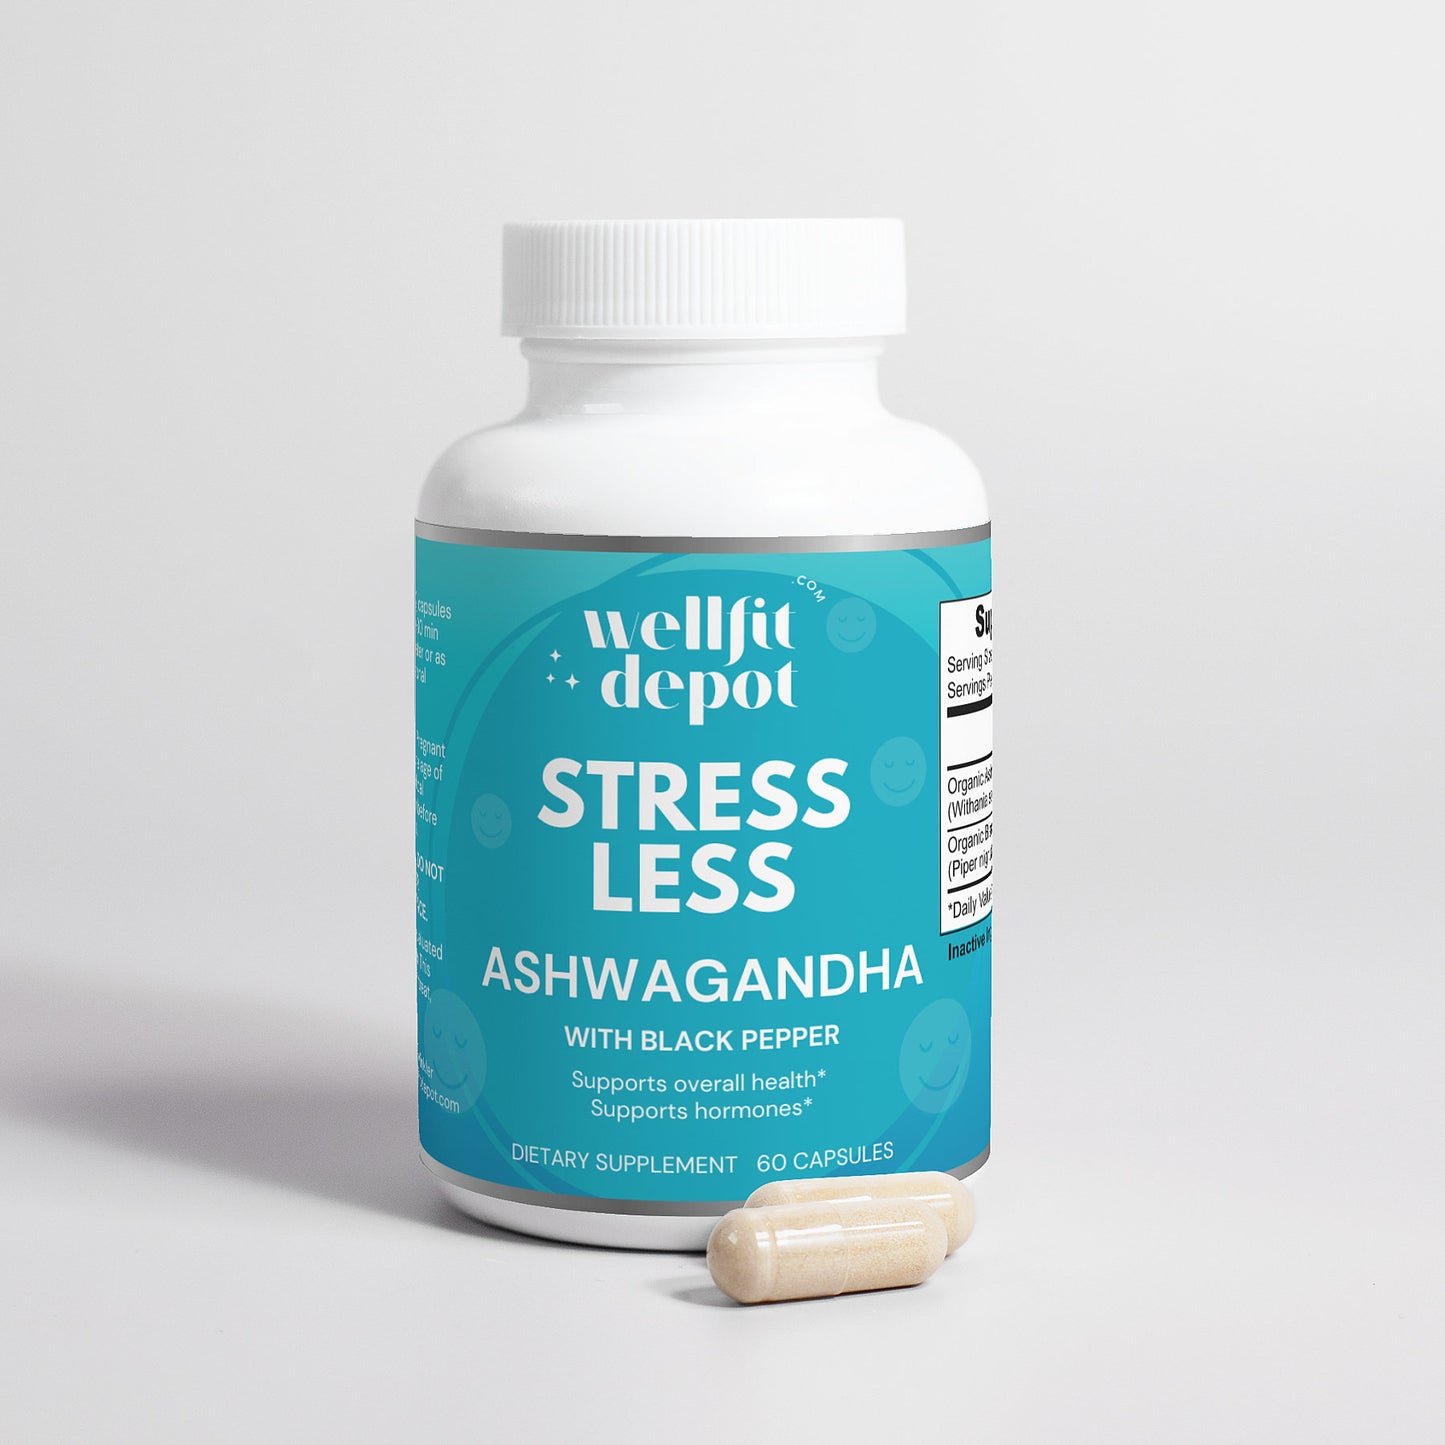 Stress Less - The Natural Stress Relief Supplement with Ashwagandha & Black Pepper